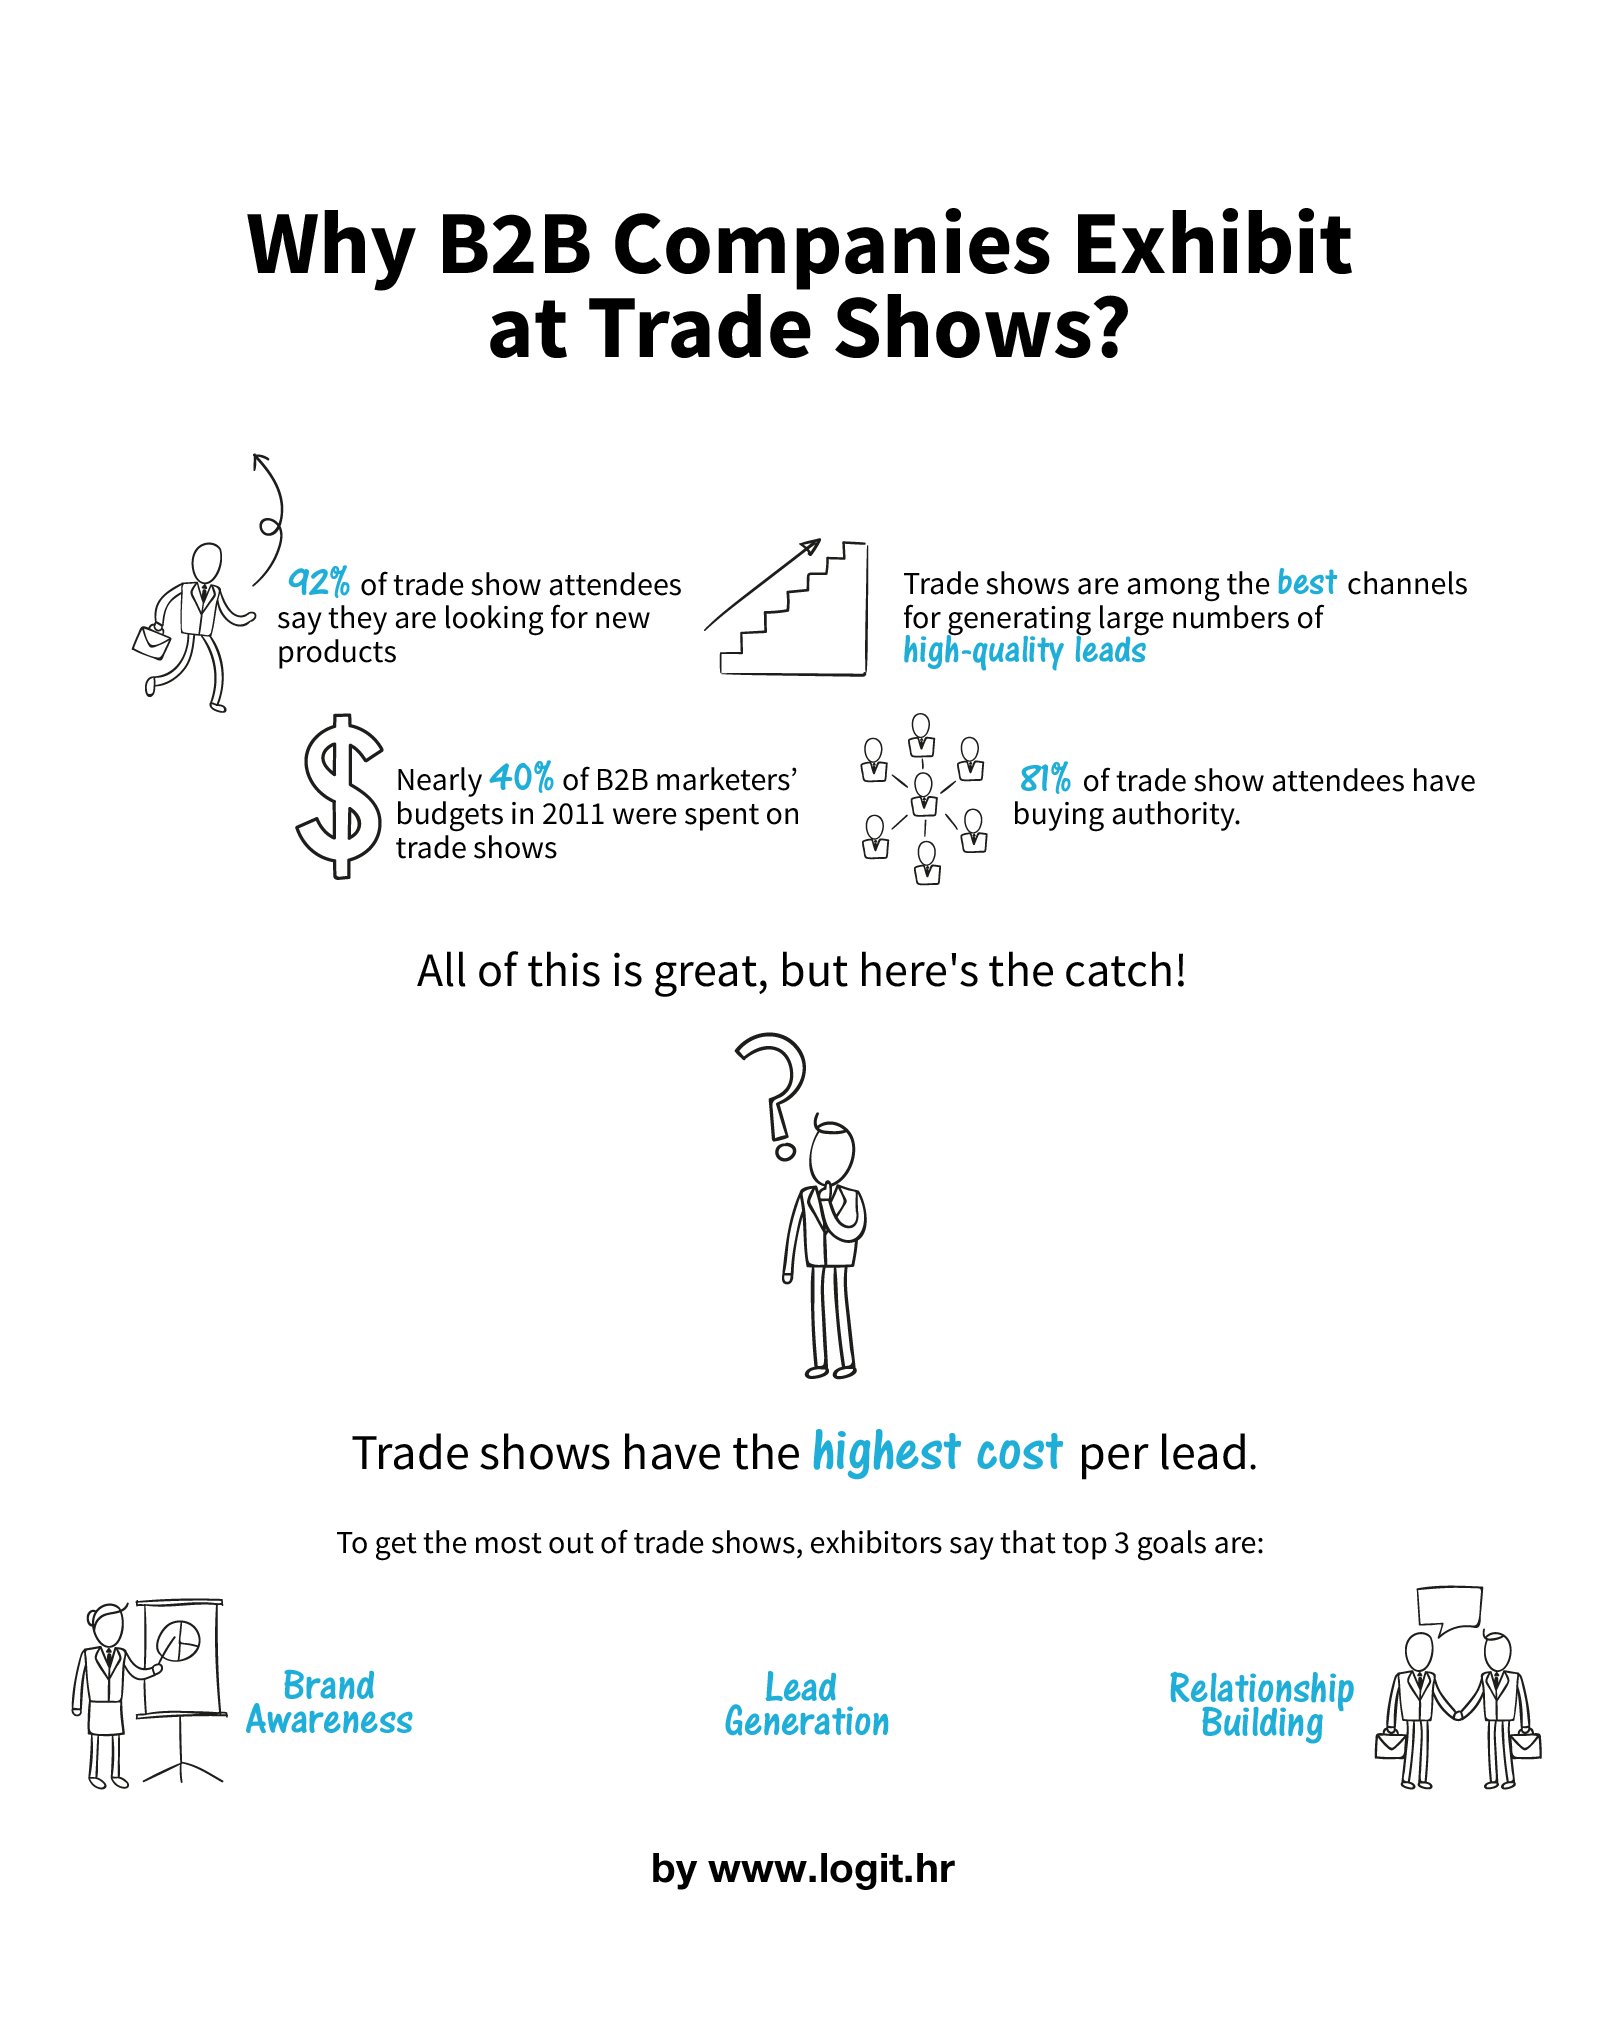 Why-B2B-Companies-Exibit-at-Trade-Shows_Source_Sans.png